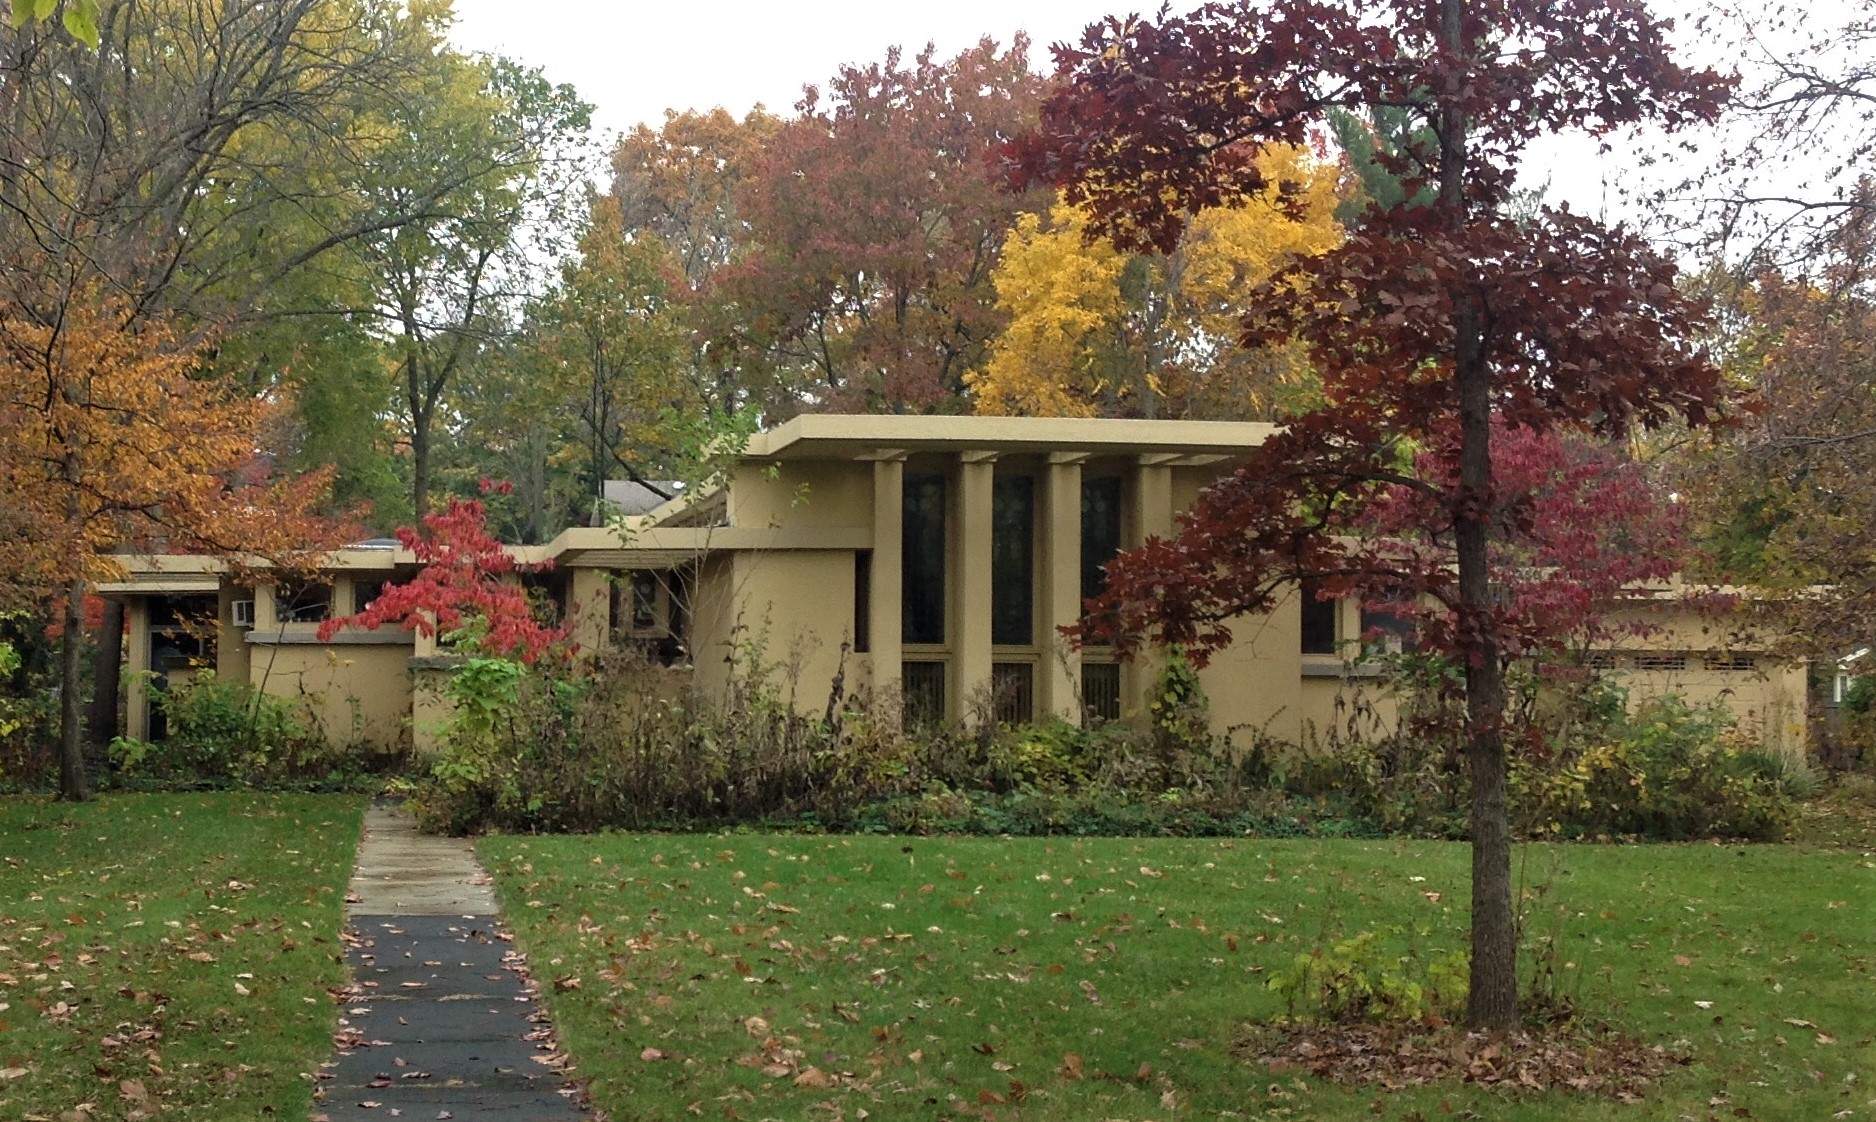 An early 20th century home amid trees, during the fall